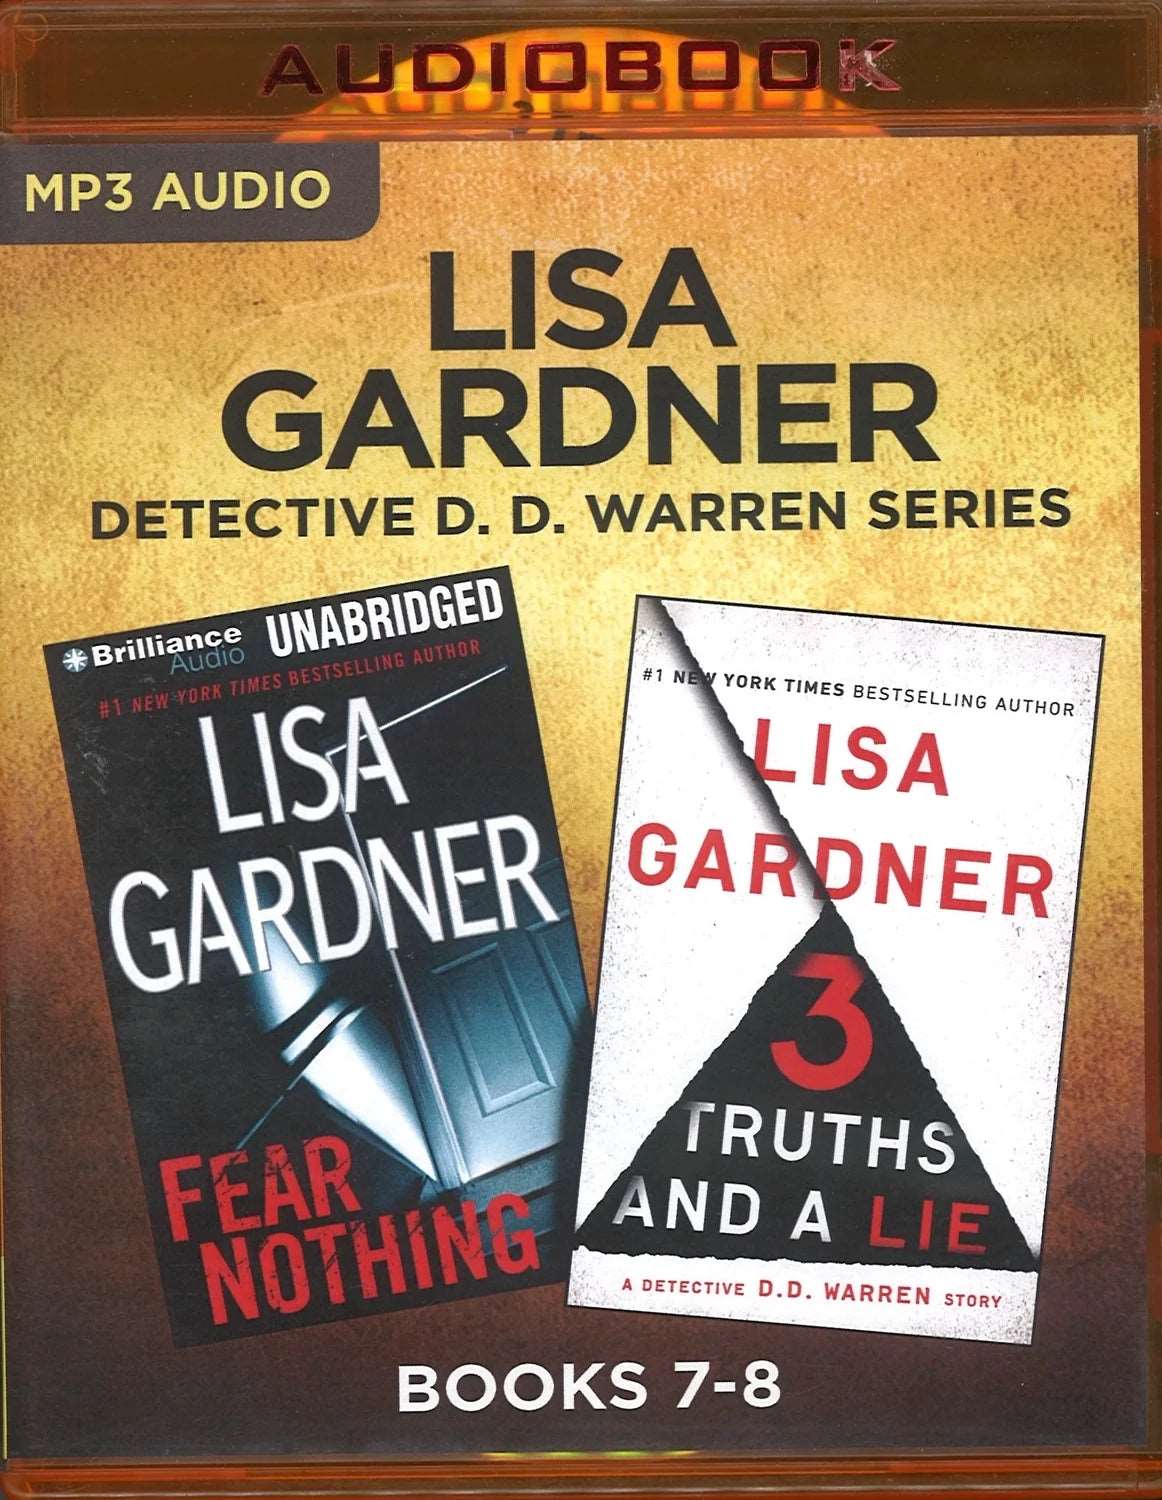 Fear Nothing / 3 Truths and a Lie by Lisa Gardner (Audiobook)